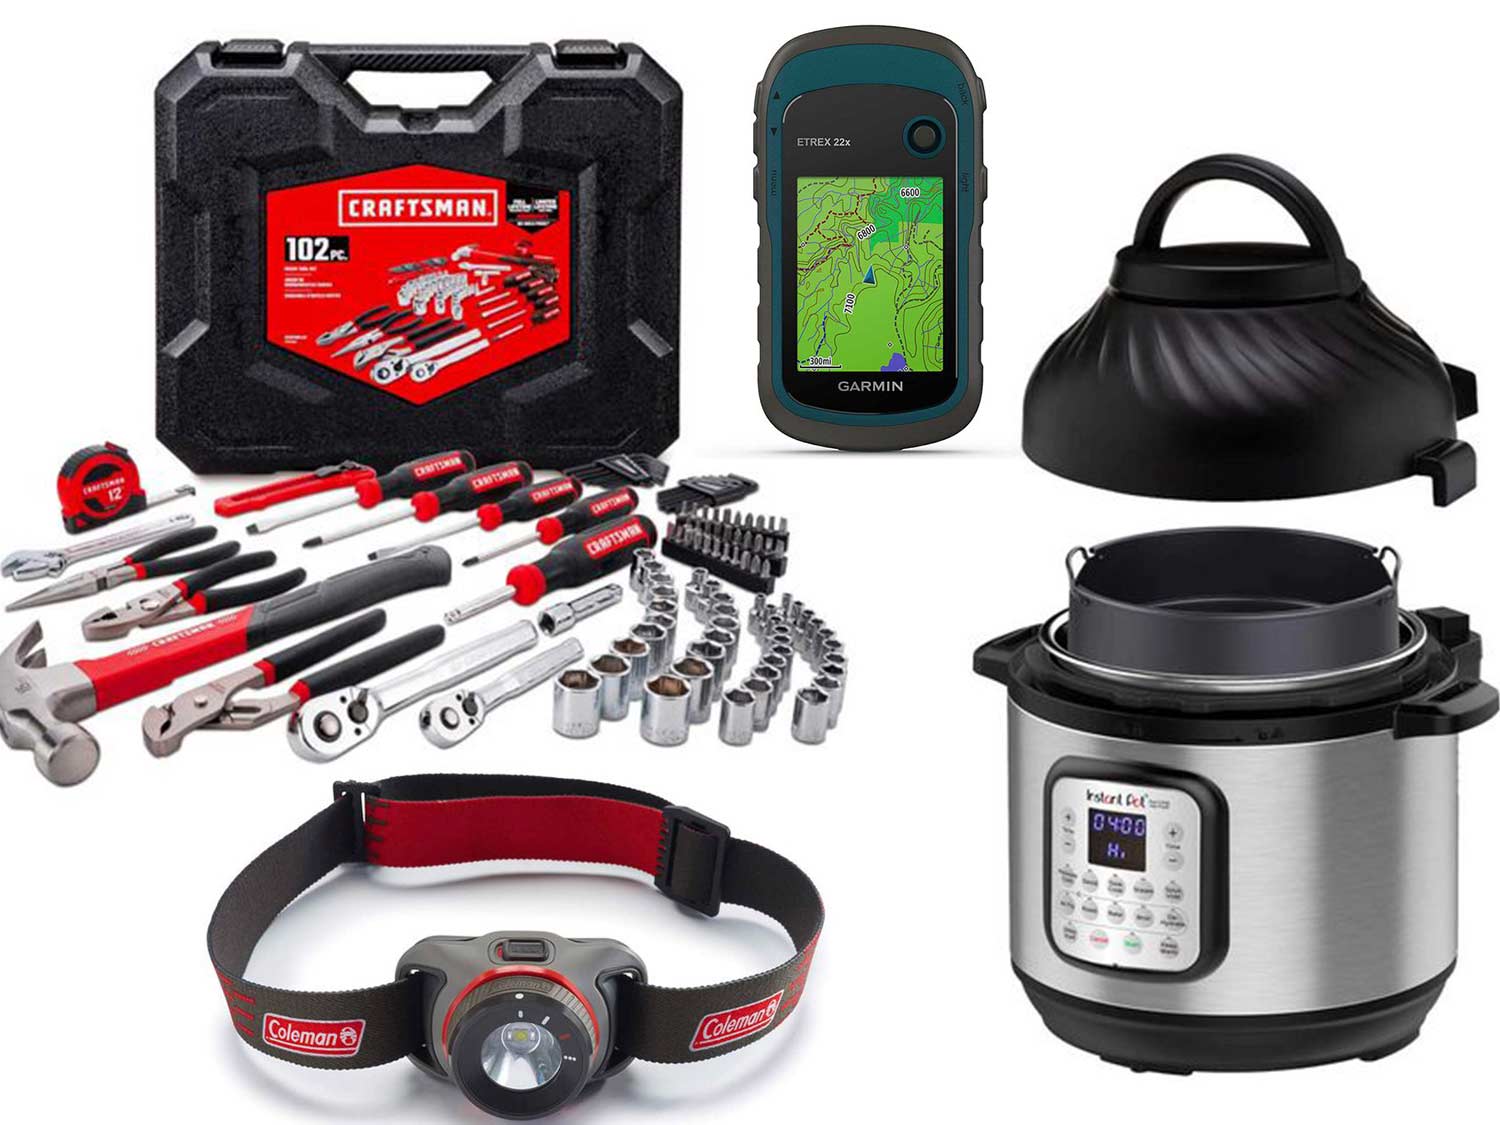 A collage of outdoor gear: Garmin wayfinder, headlamp, pressure cooker, and craftsman toolset on a white background.